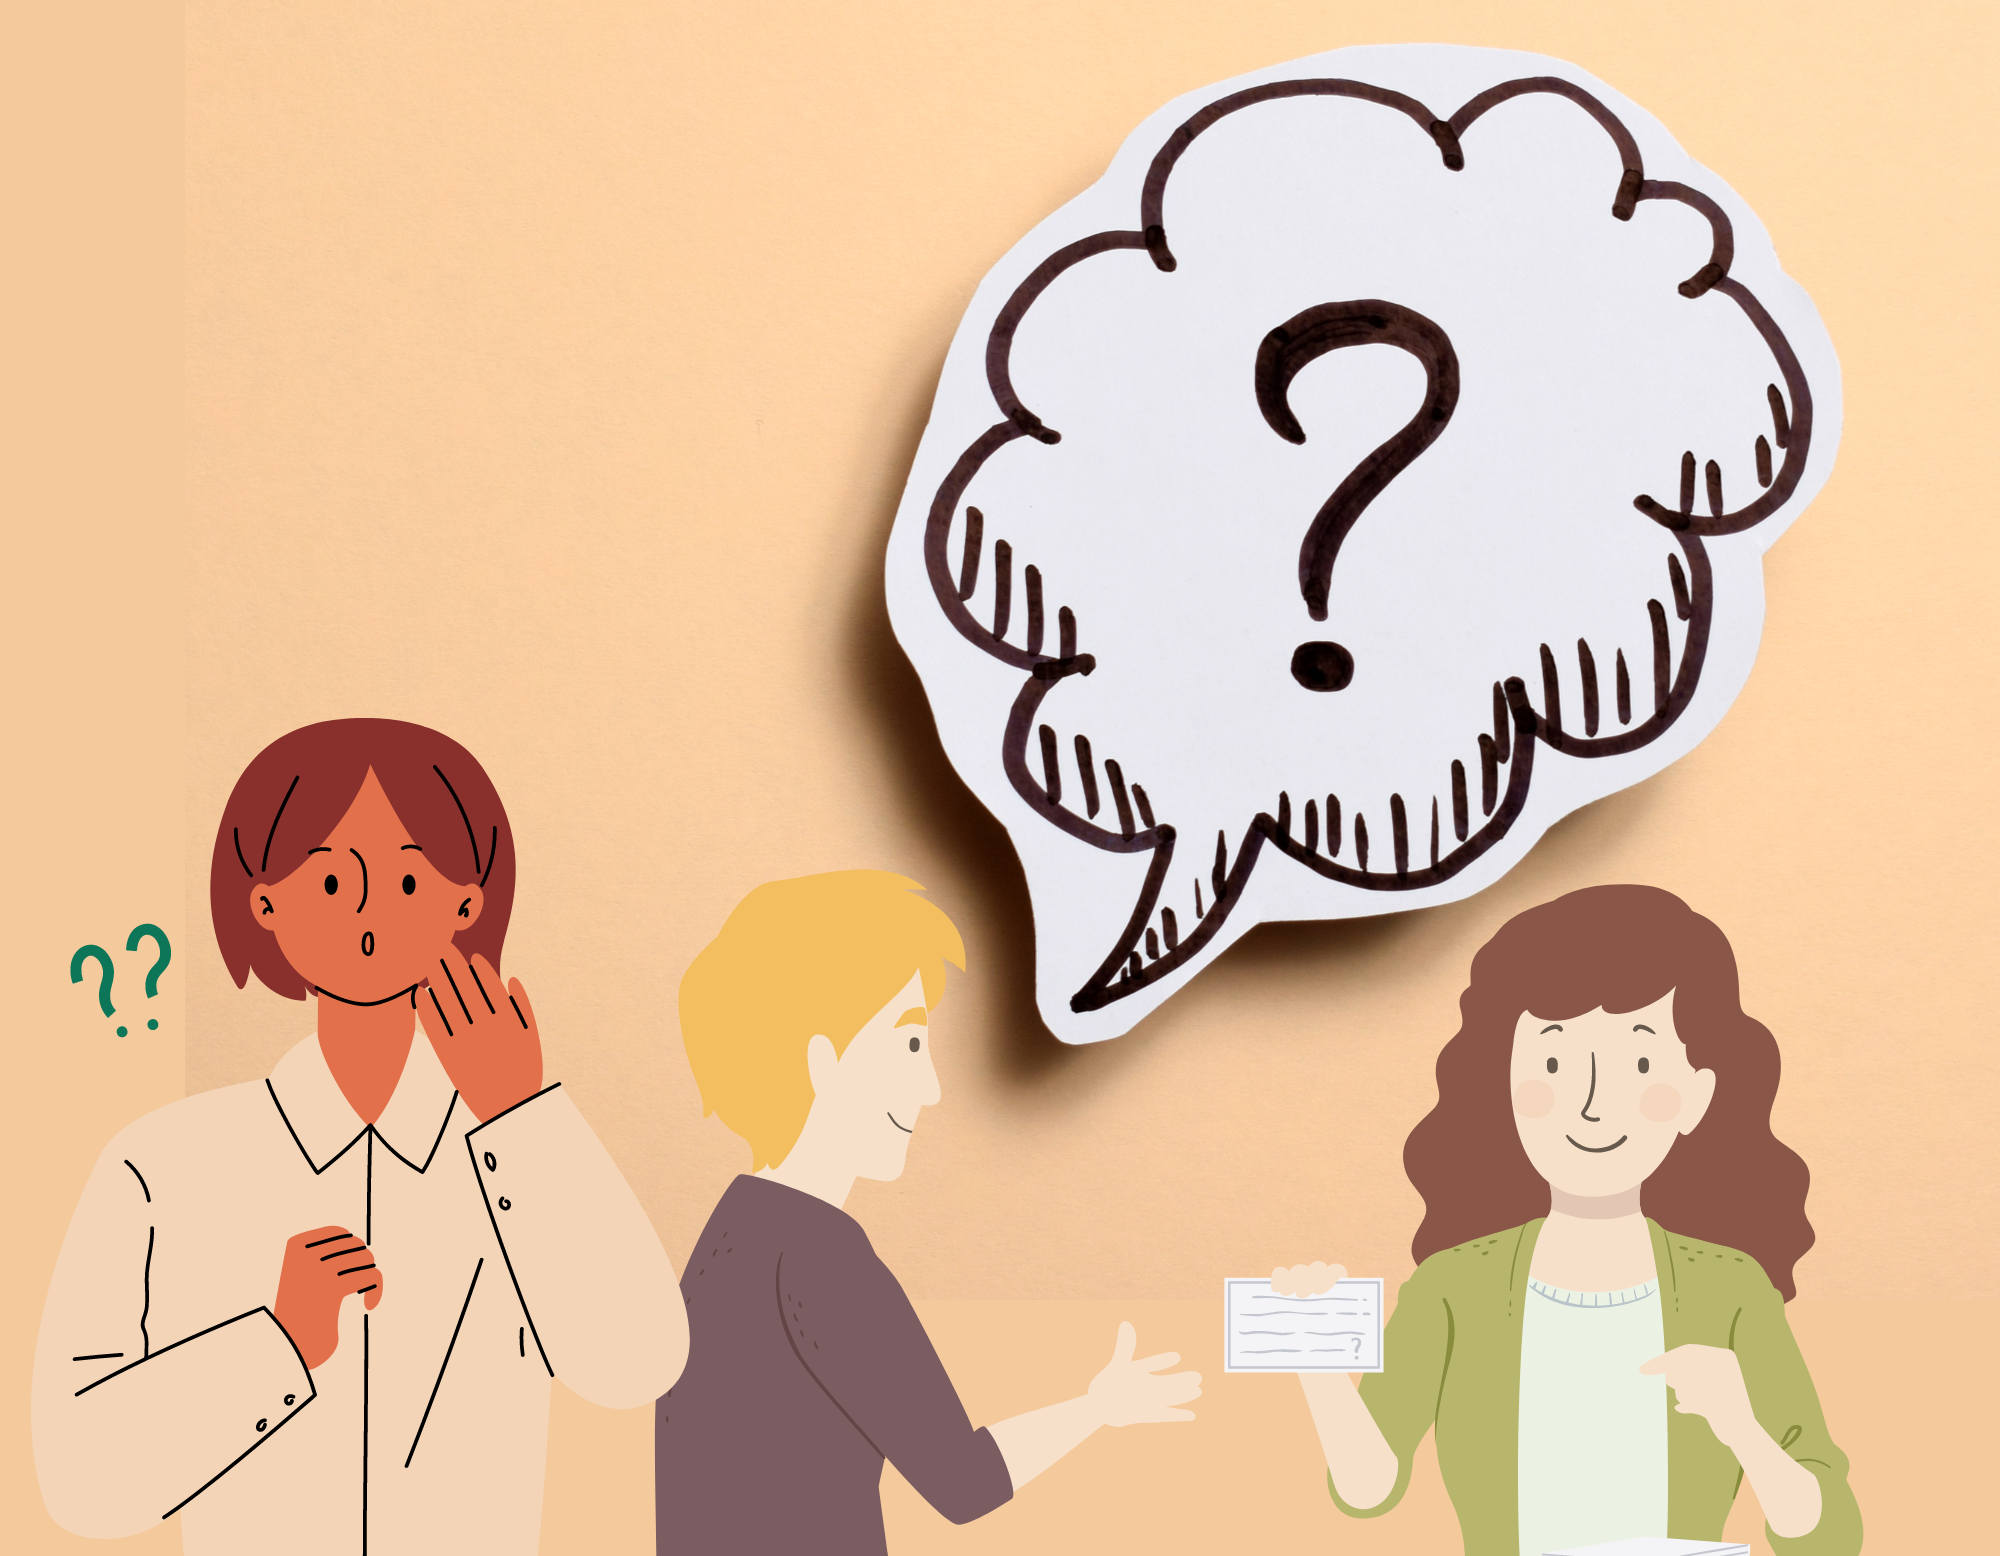 Cartoon of two students asking questions and using flash cards and one student looking confused with a question mark next to her head.